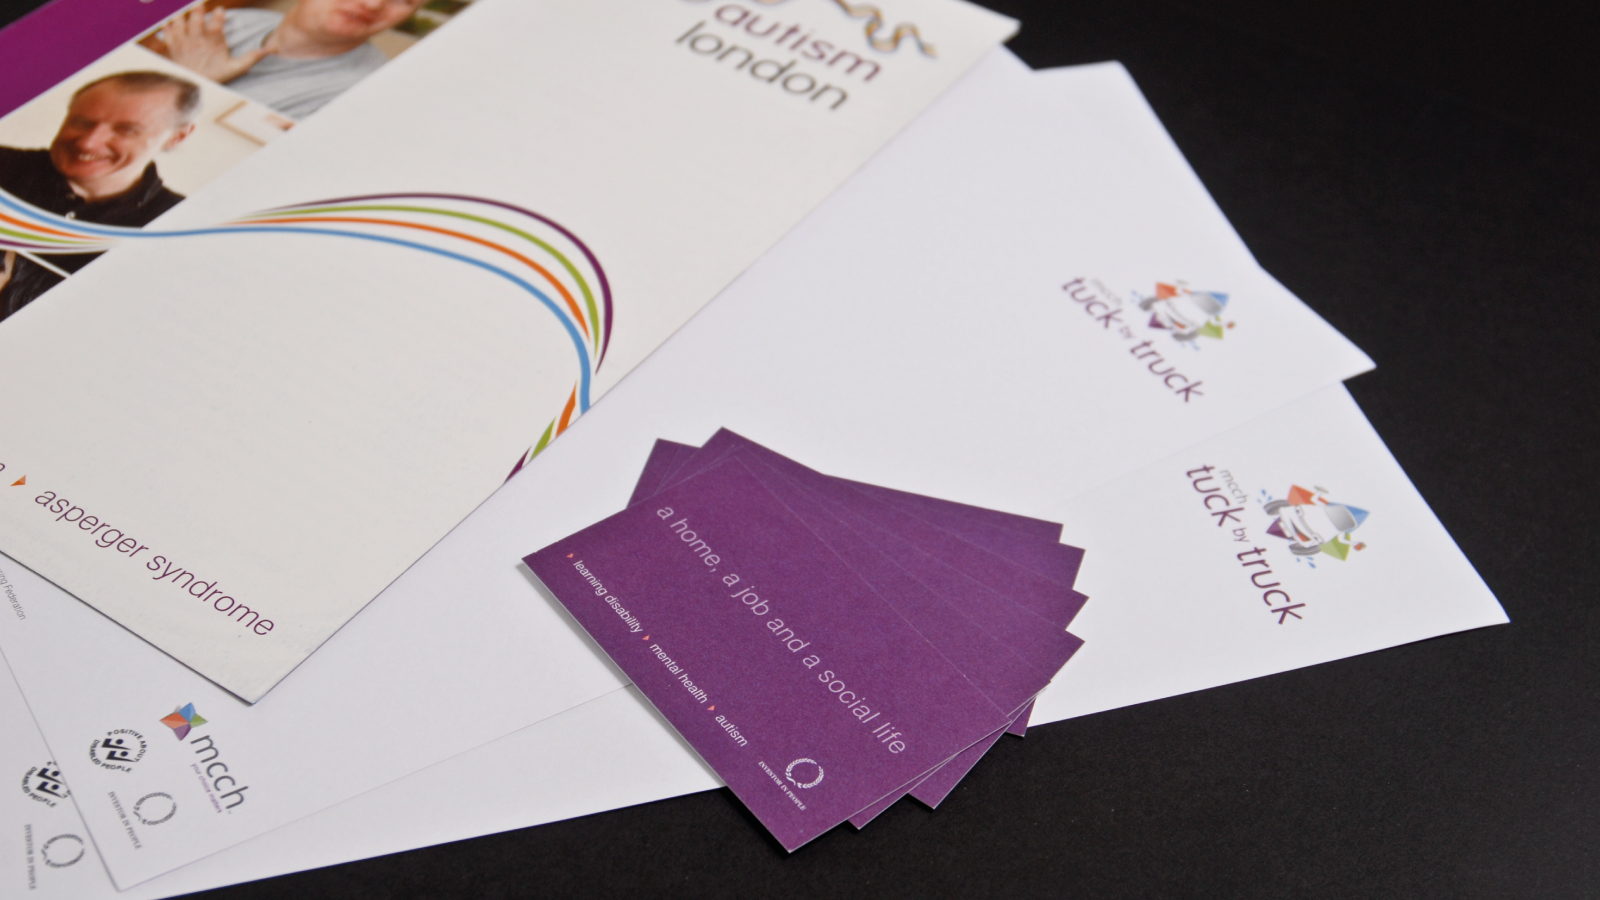 Stationery designs and corporate brochure designs for Charity MCCH